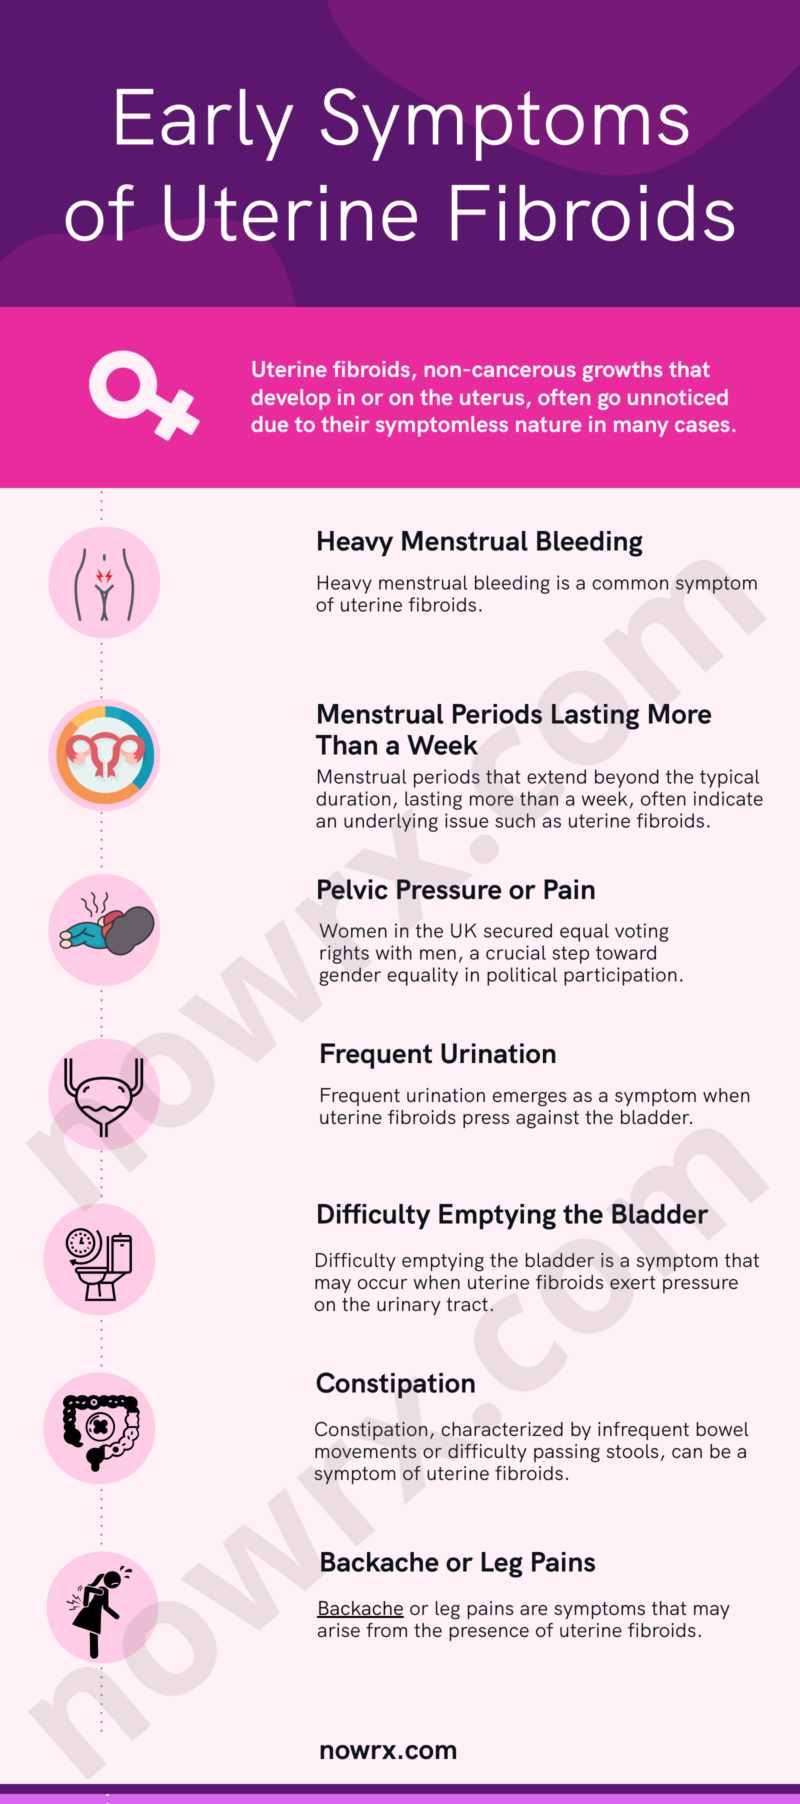 This infographic represent 7 early symptoms of uterine fibroids